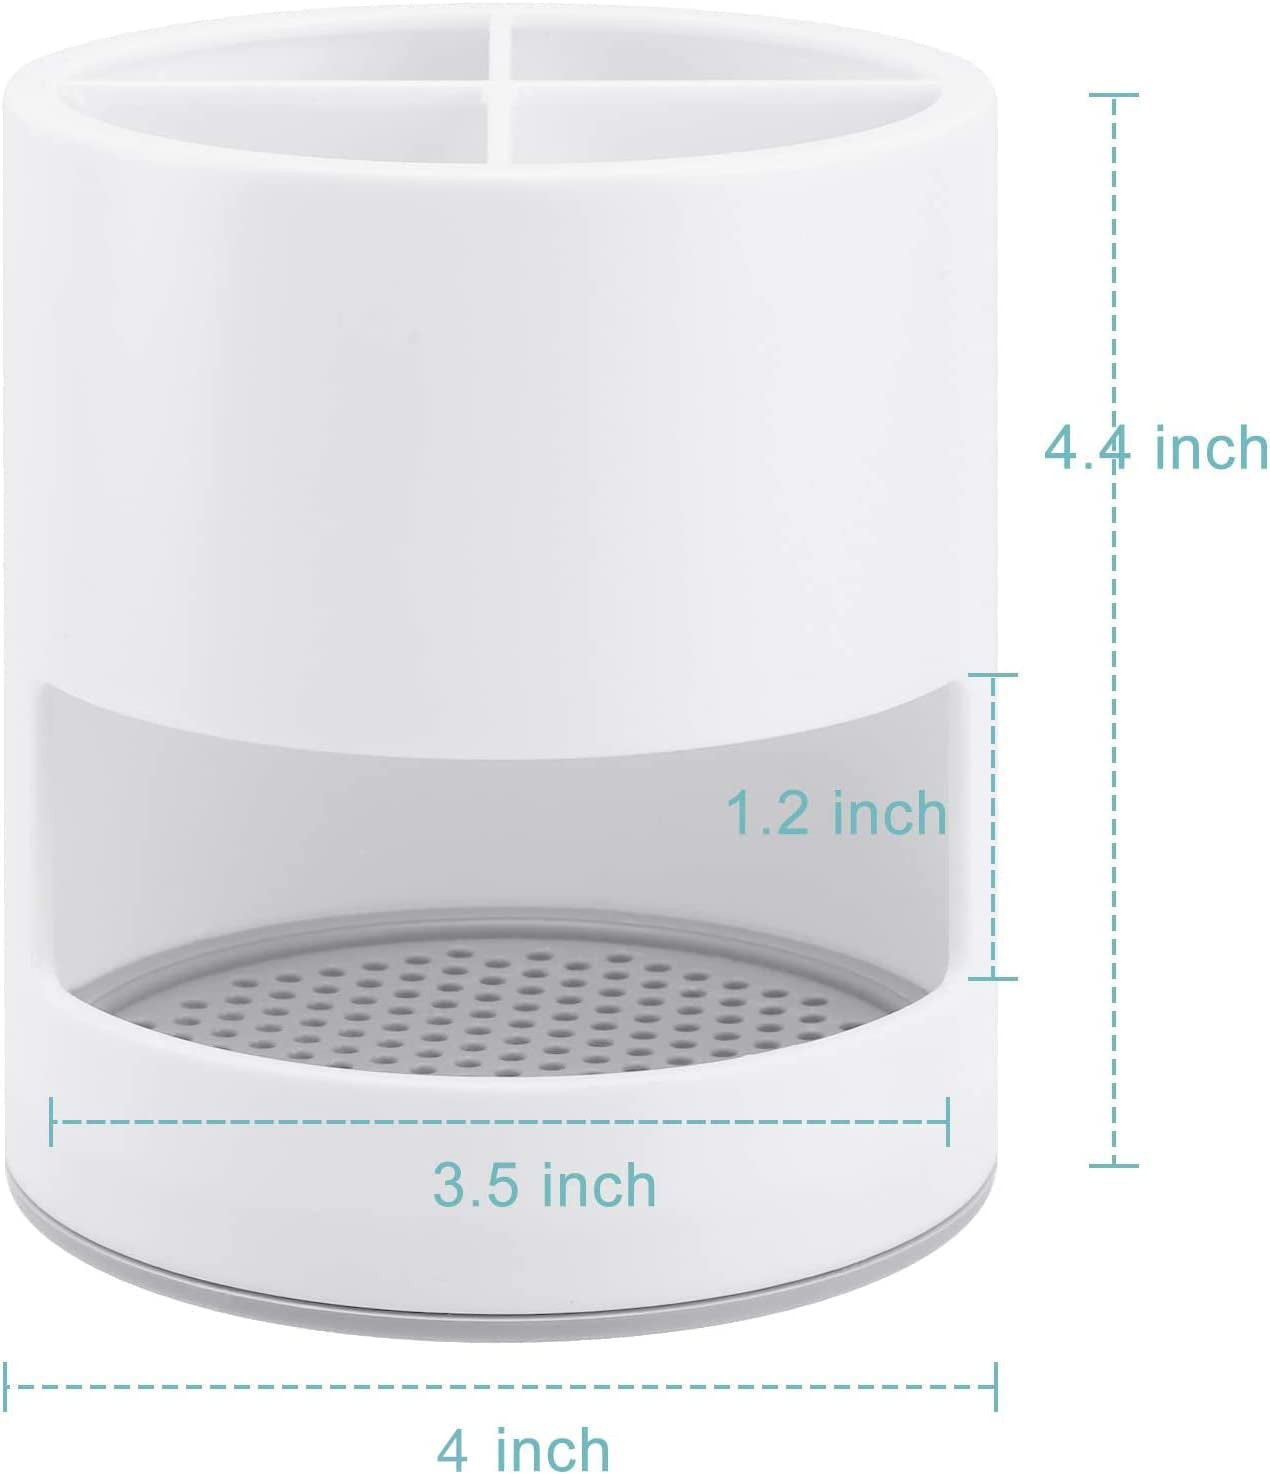 Toothbrush Holder, Ventilated Mould-Proof Toothbrush Caddy, Tough Small Toothbrush Pot Stand for Easy Bathroom Storage, White